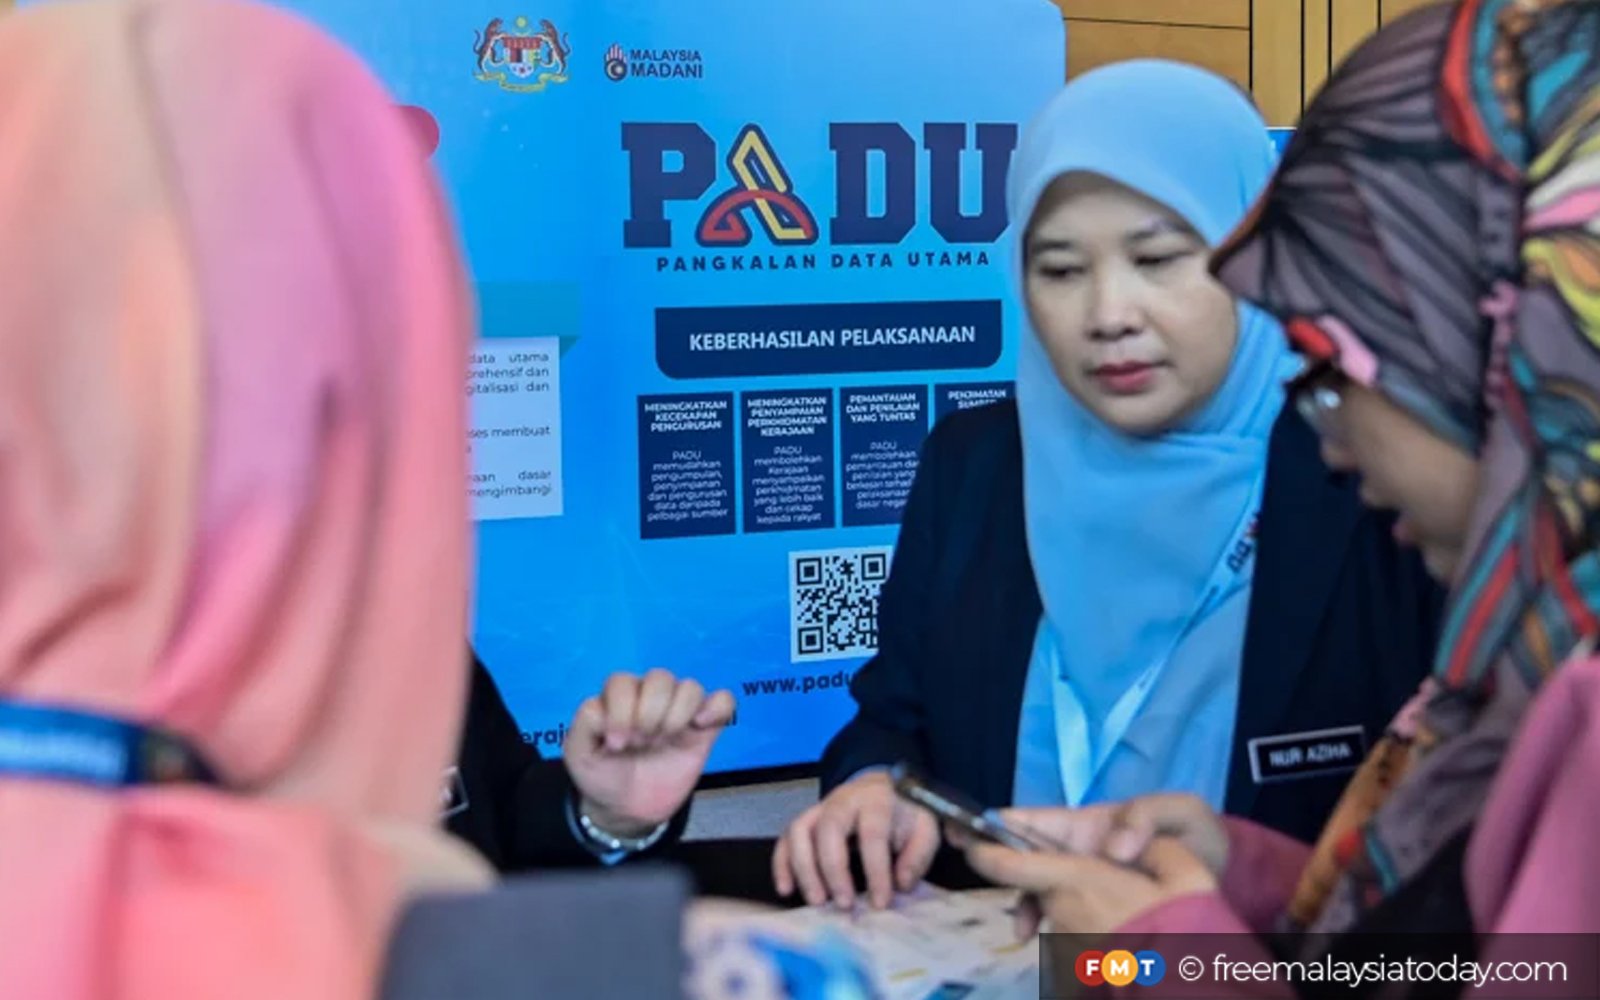 padu developed using outdated methods, says cybersecurity expert